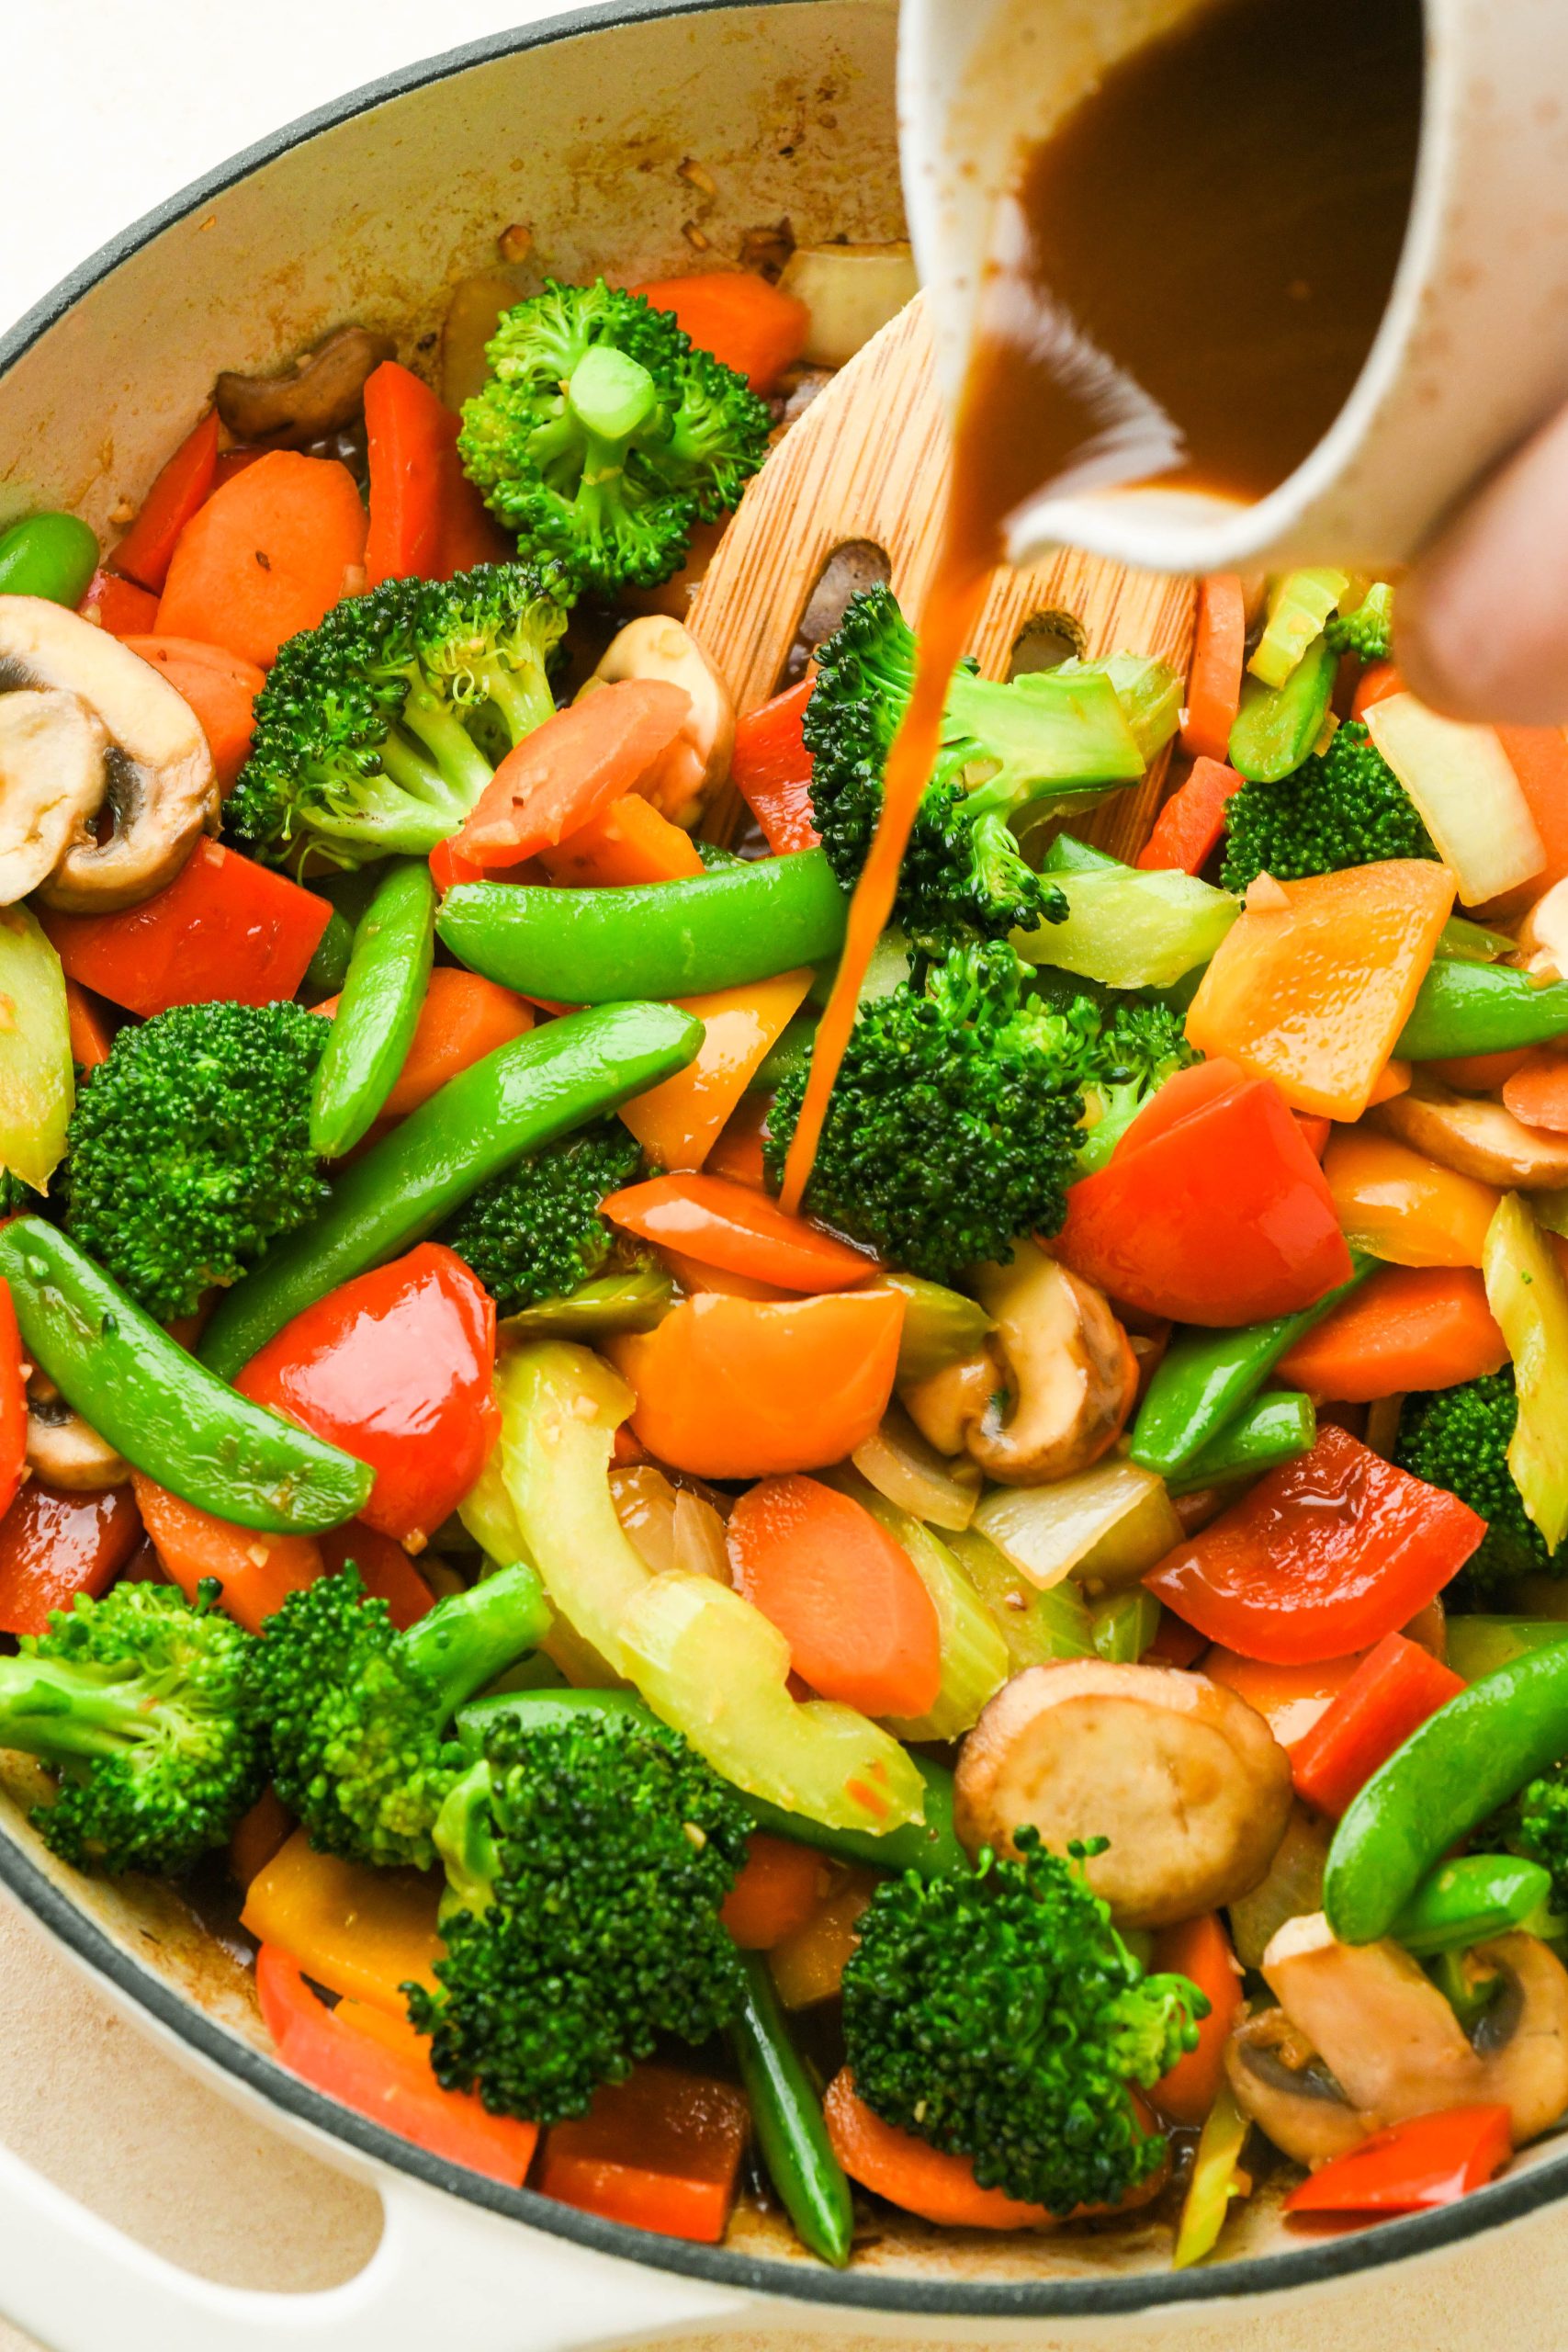 How to make easy veggie stir fry: Slightly cooked vegetables in a large skillet with a hand pouring in stir fry sauce.